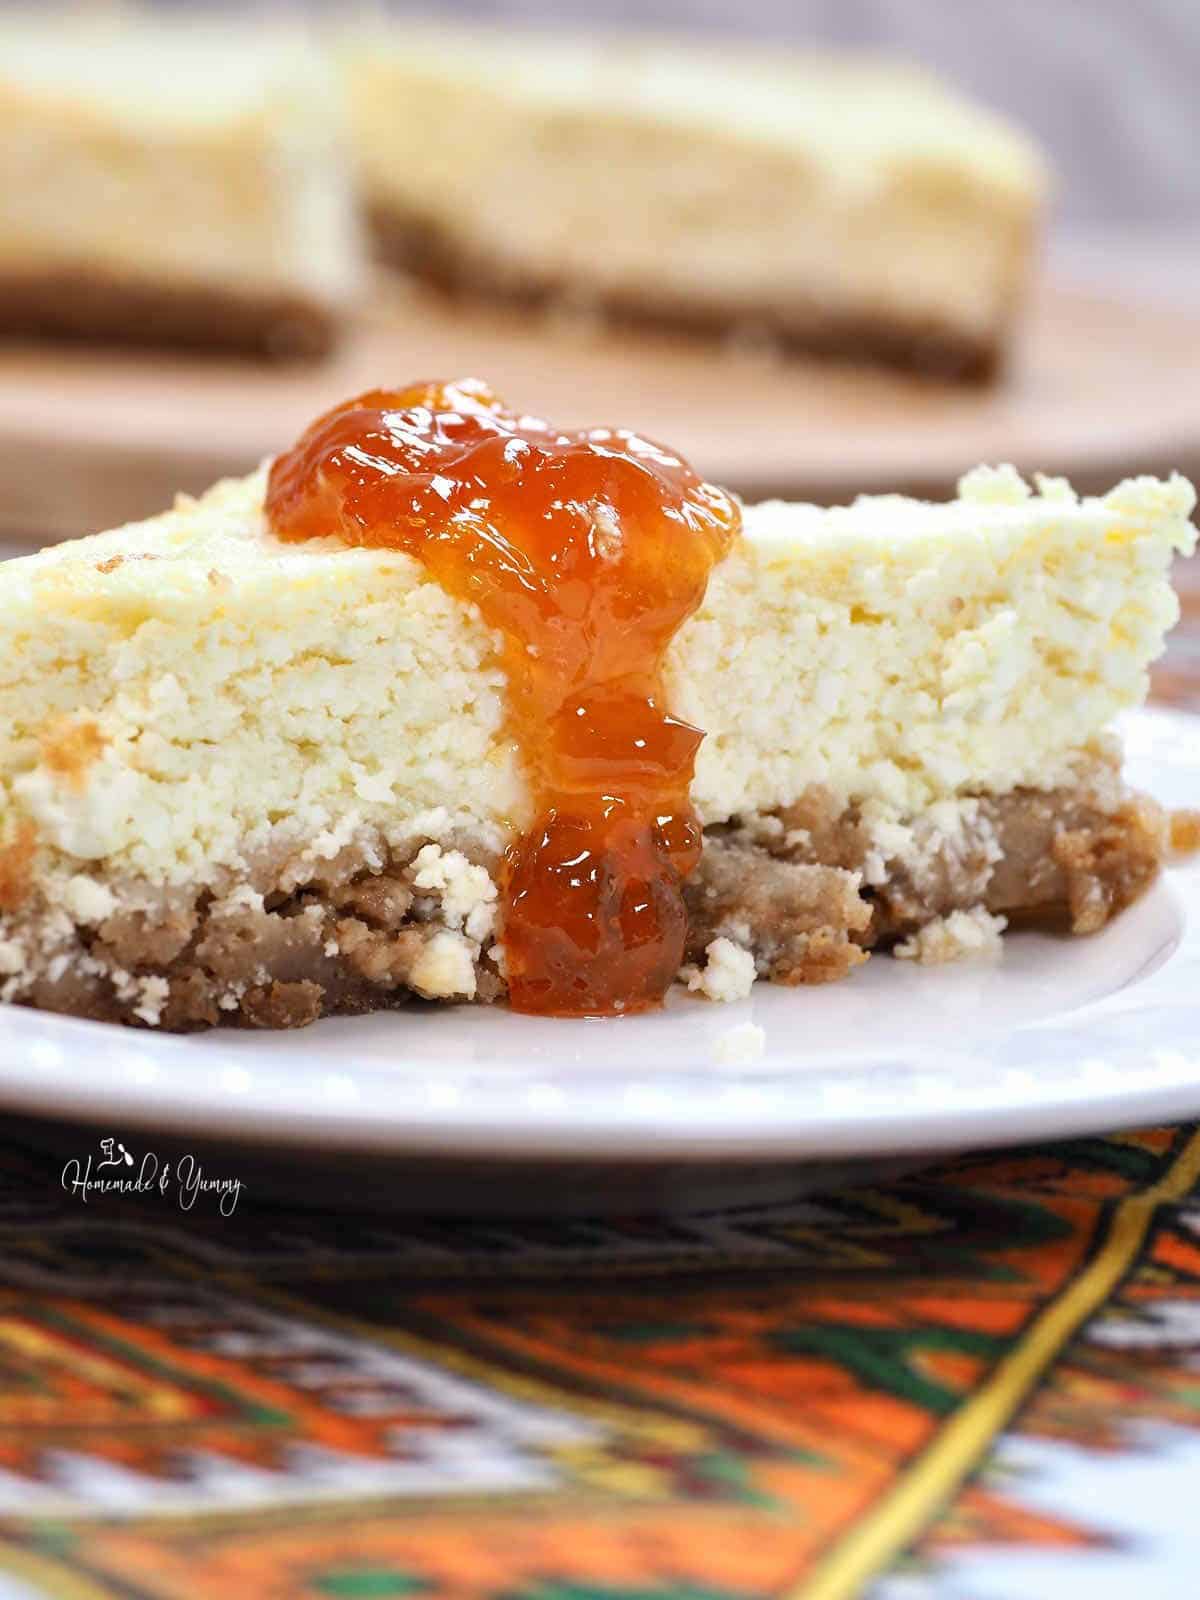 A slice of cheesecake made with dry cottage cheese.